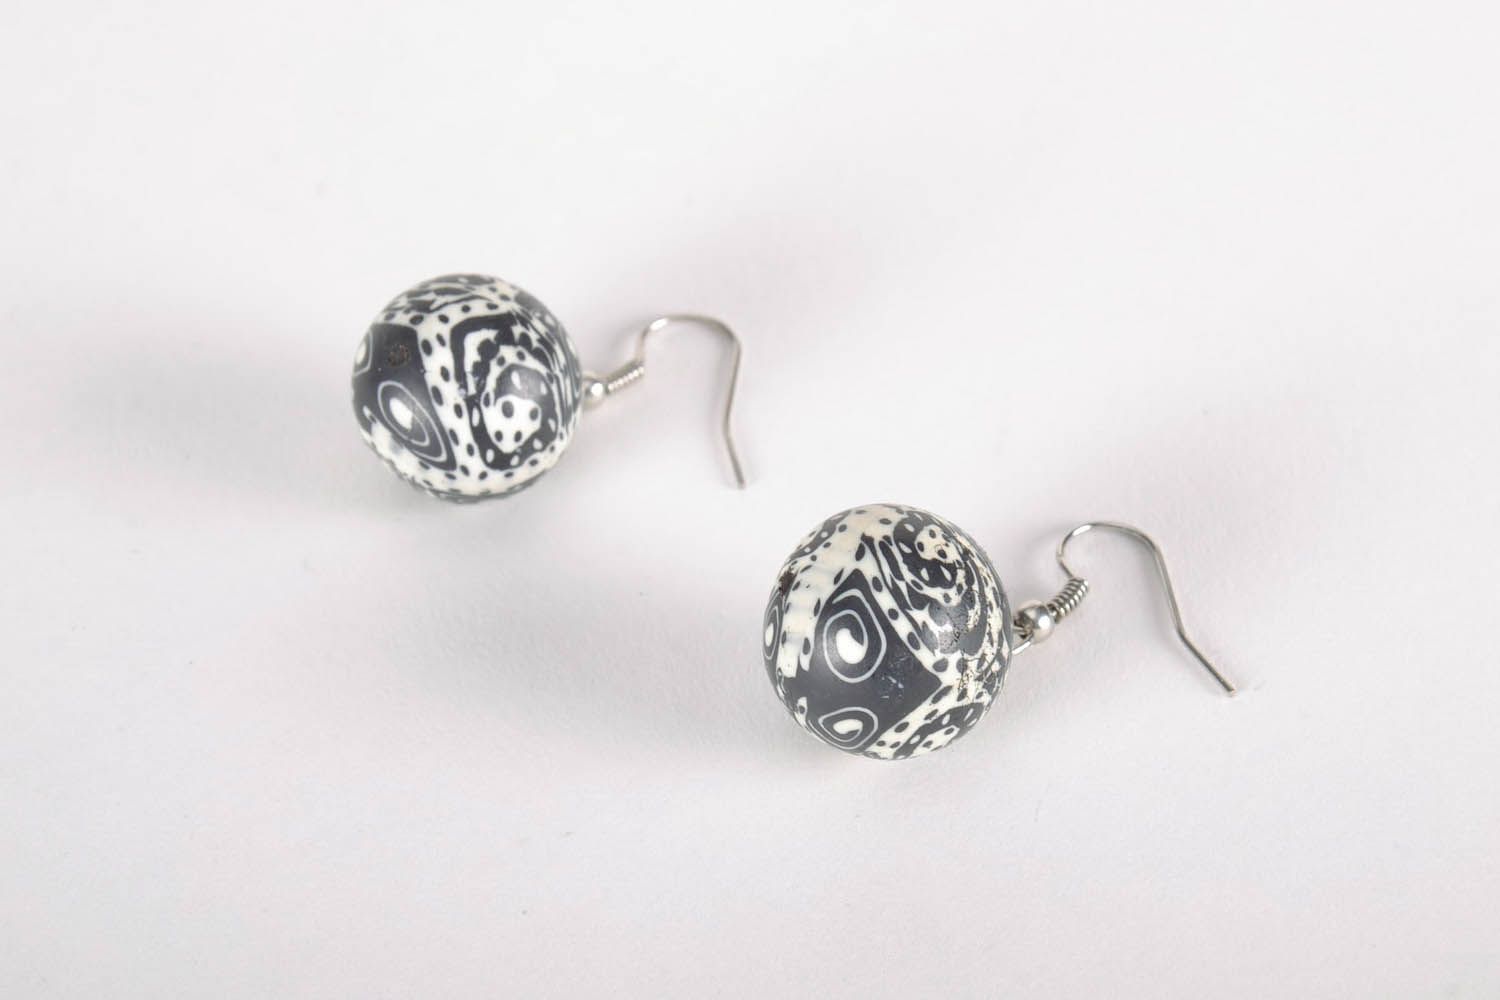 Ball-earrings made of polymer clay photo 2